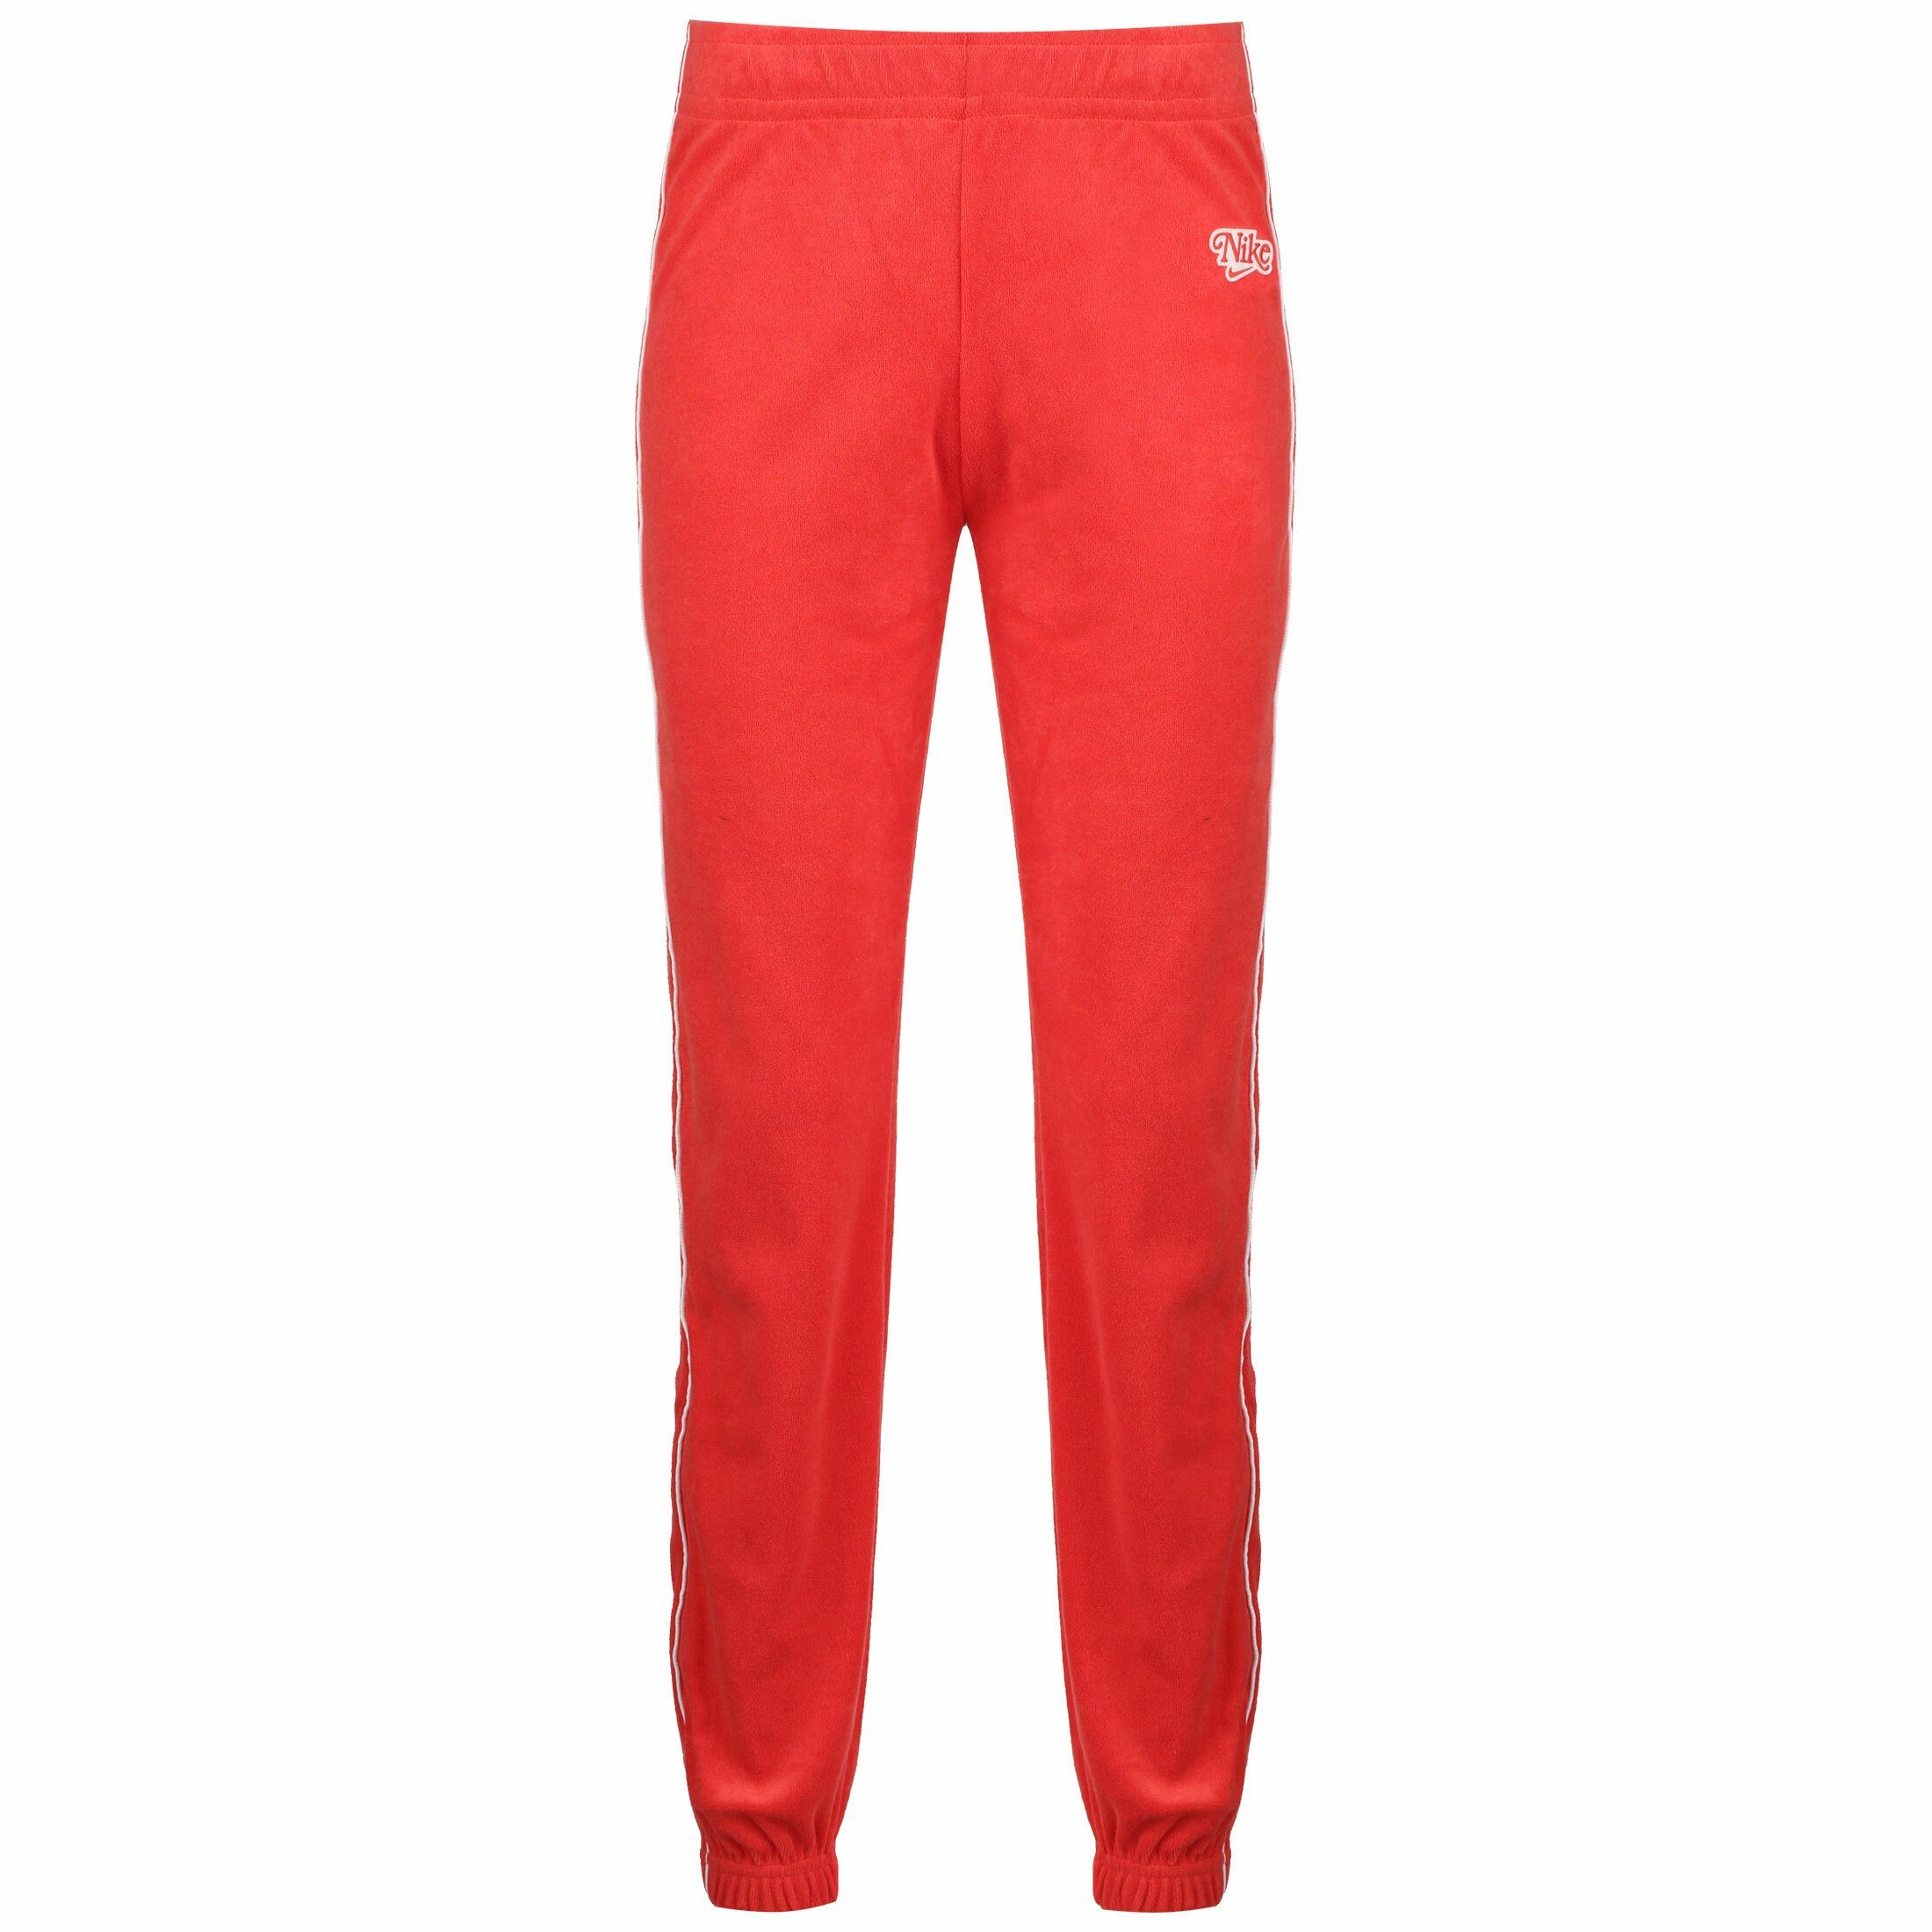 Nike Sportswear Jogginghose »Retro«, Weiches French Terry-Material online  kaufen | OTTO